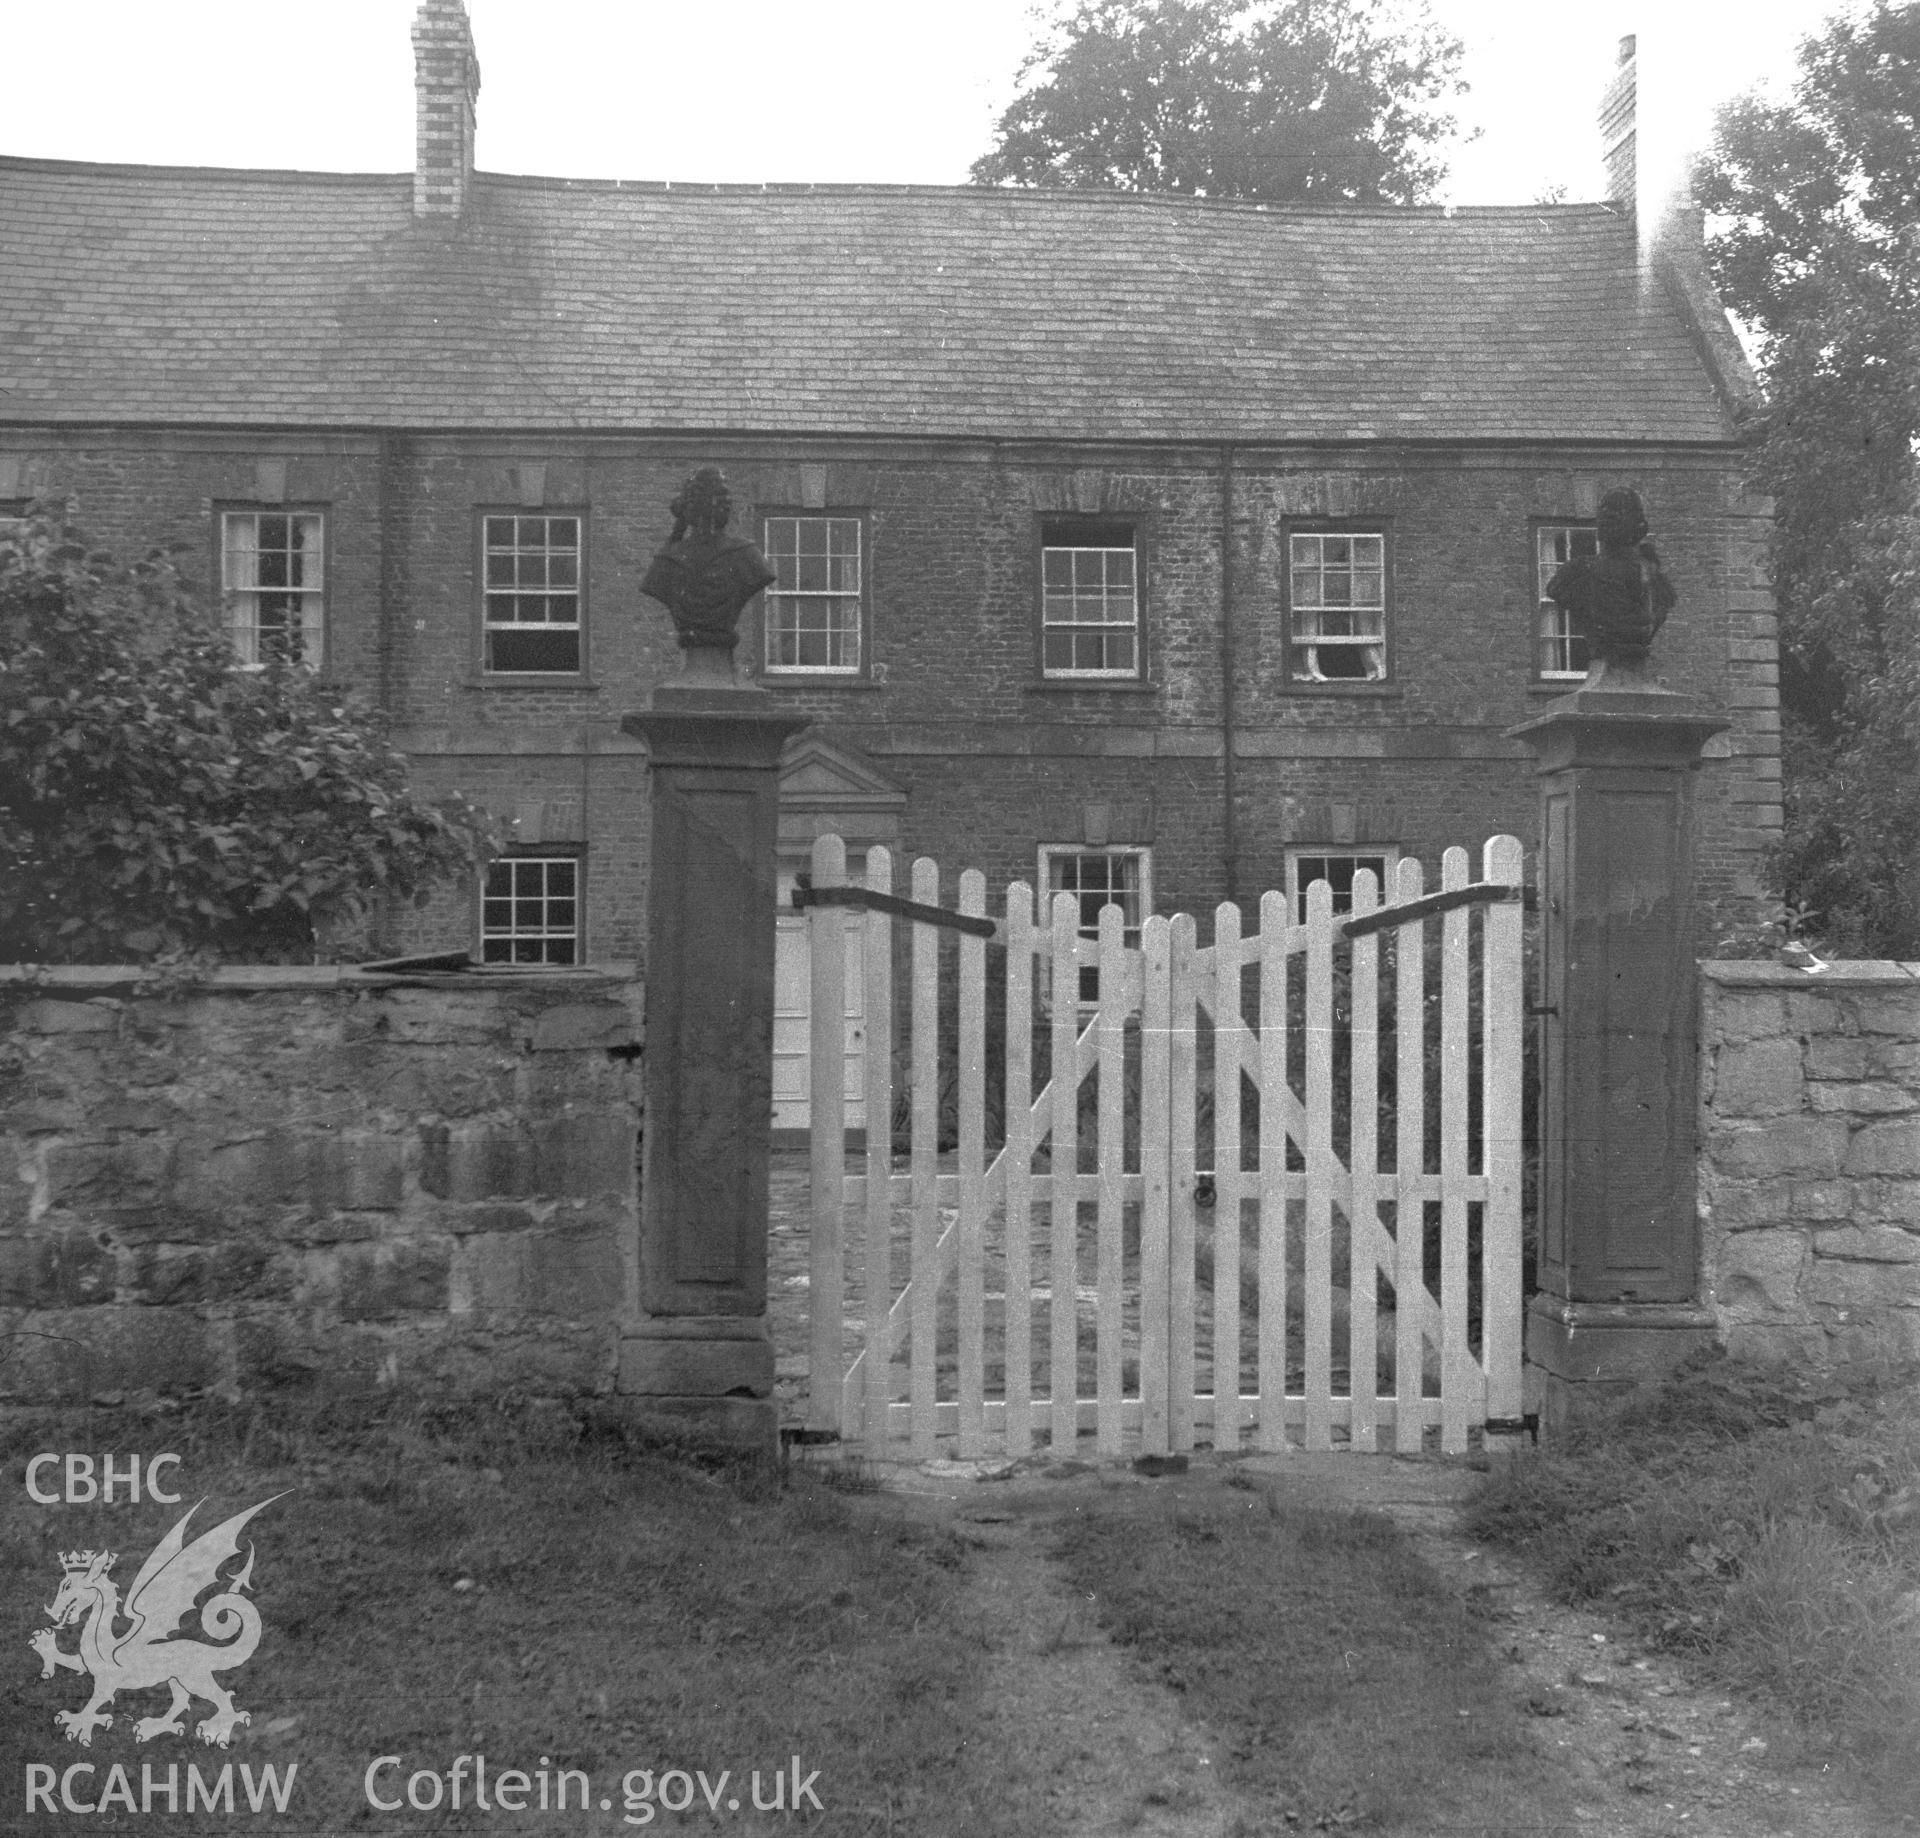 Digital copy of a nitrate negative showing exterior view of unknown house in Denbighshire.